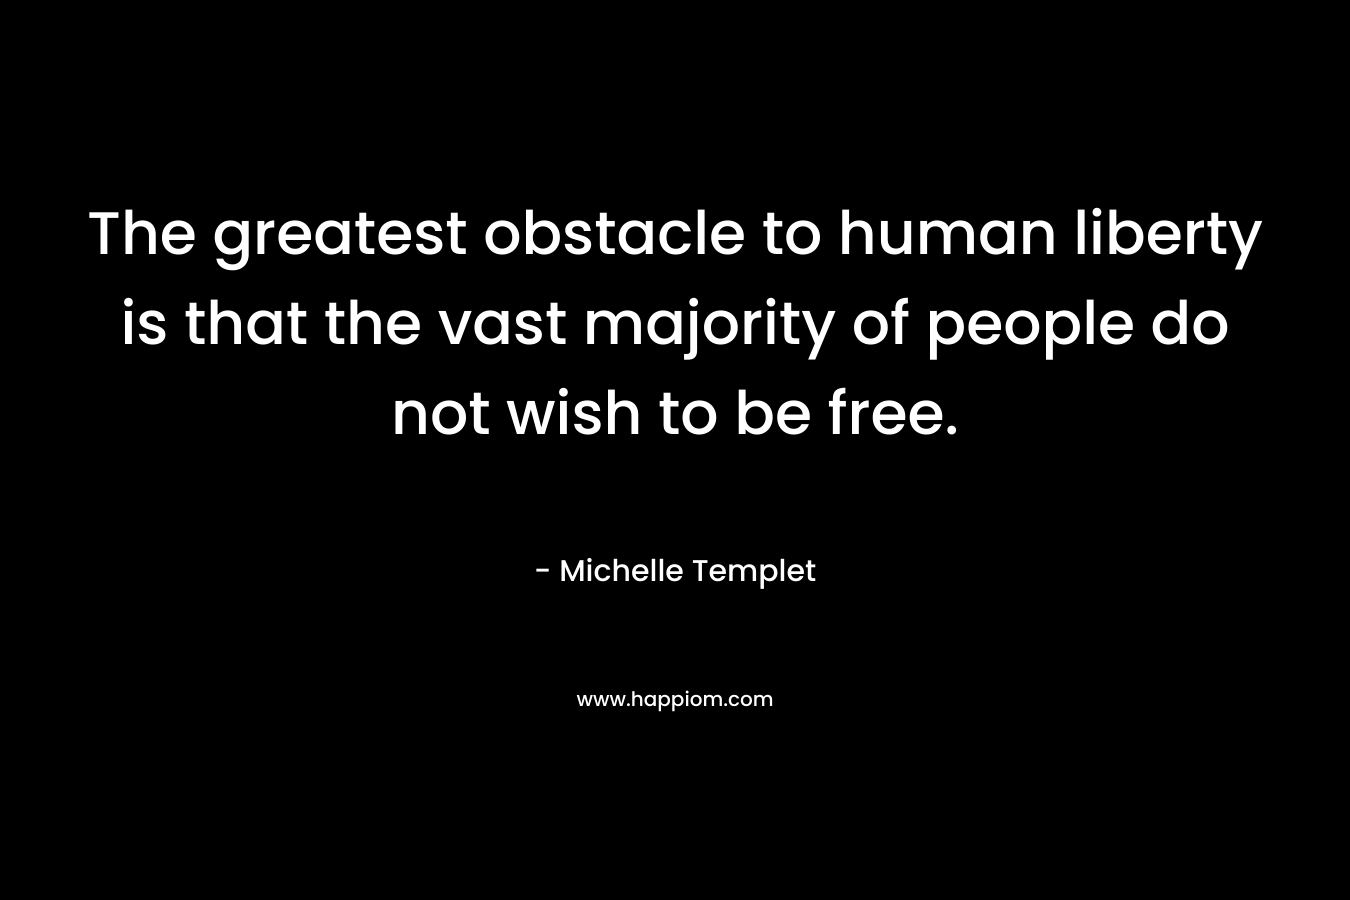 The greatest obstacle to human liberty is that the vast majority of people do not wish to be free. – Michelle Templet